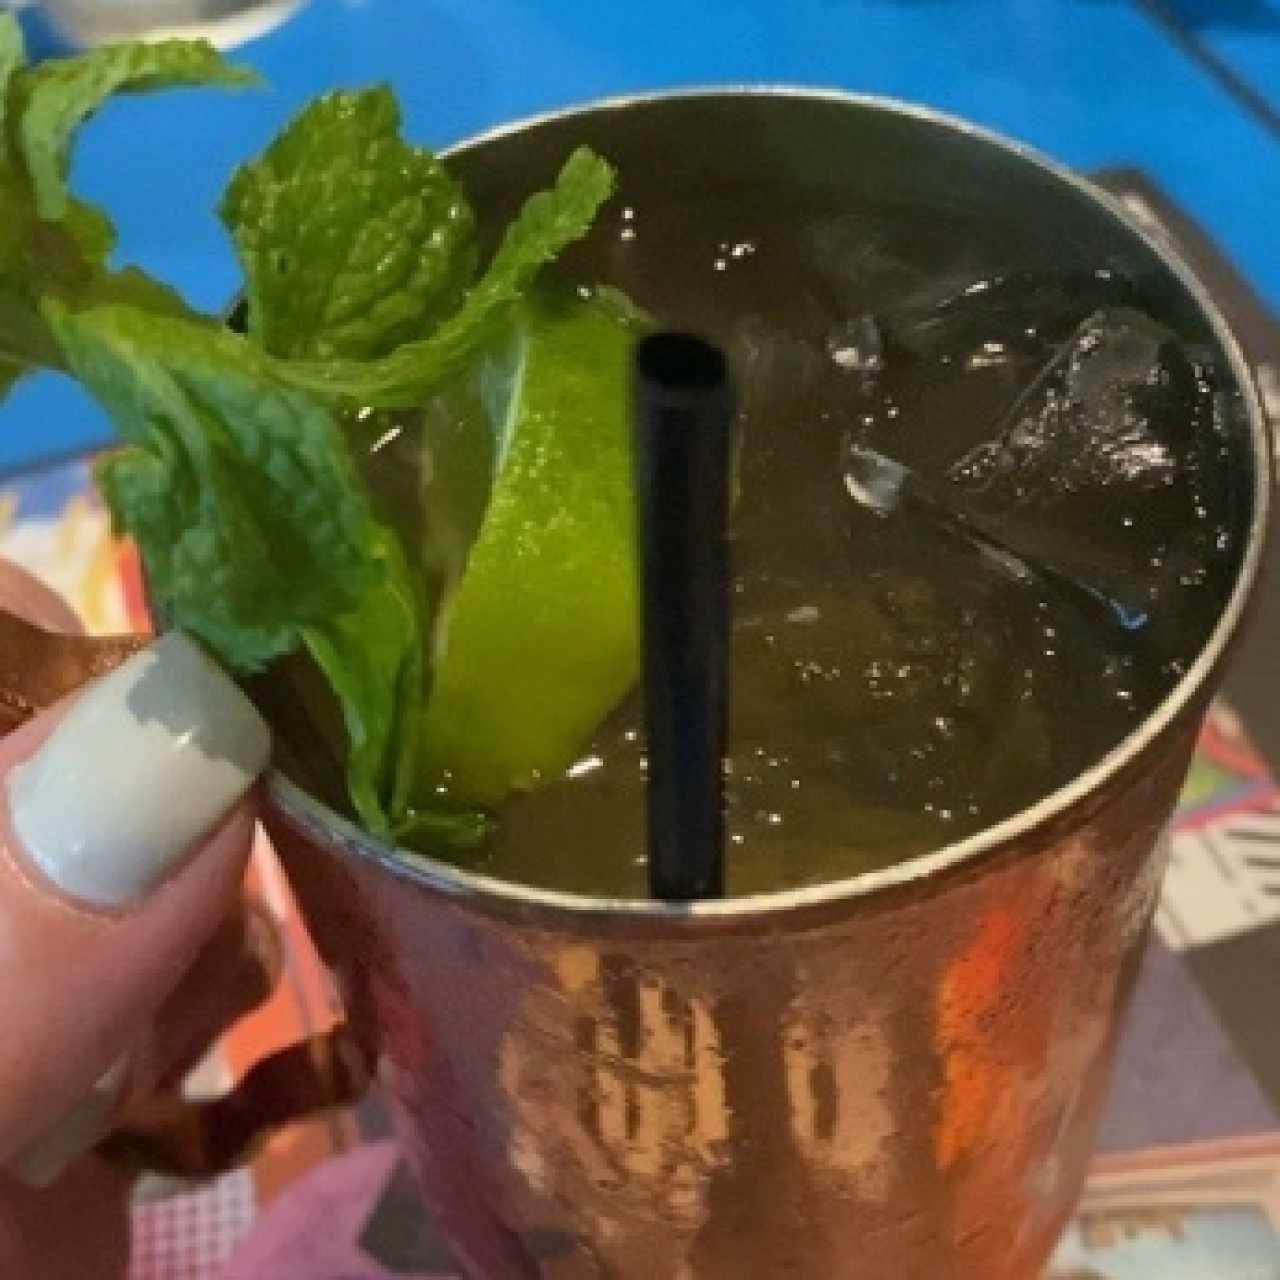 New Cocktails - Brava Moscow Mule